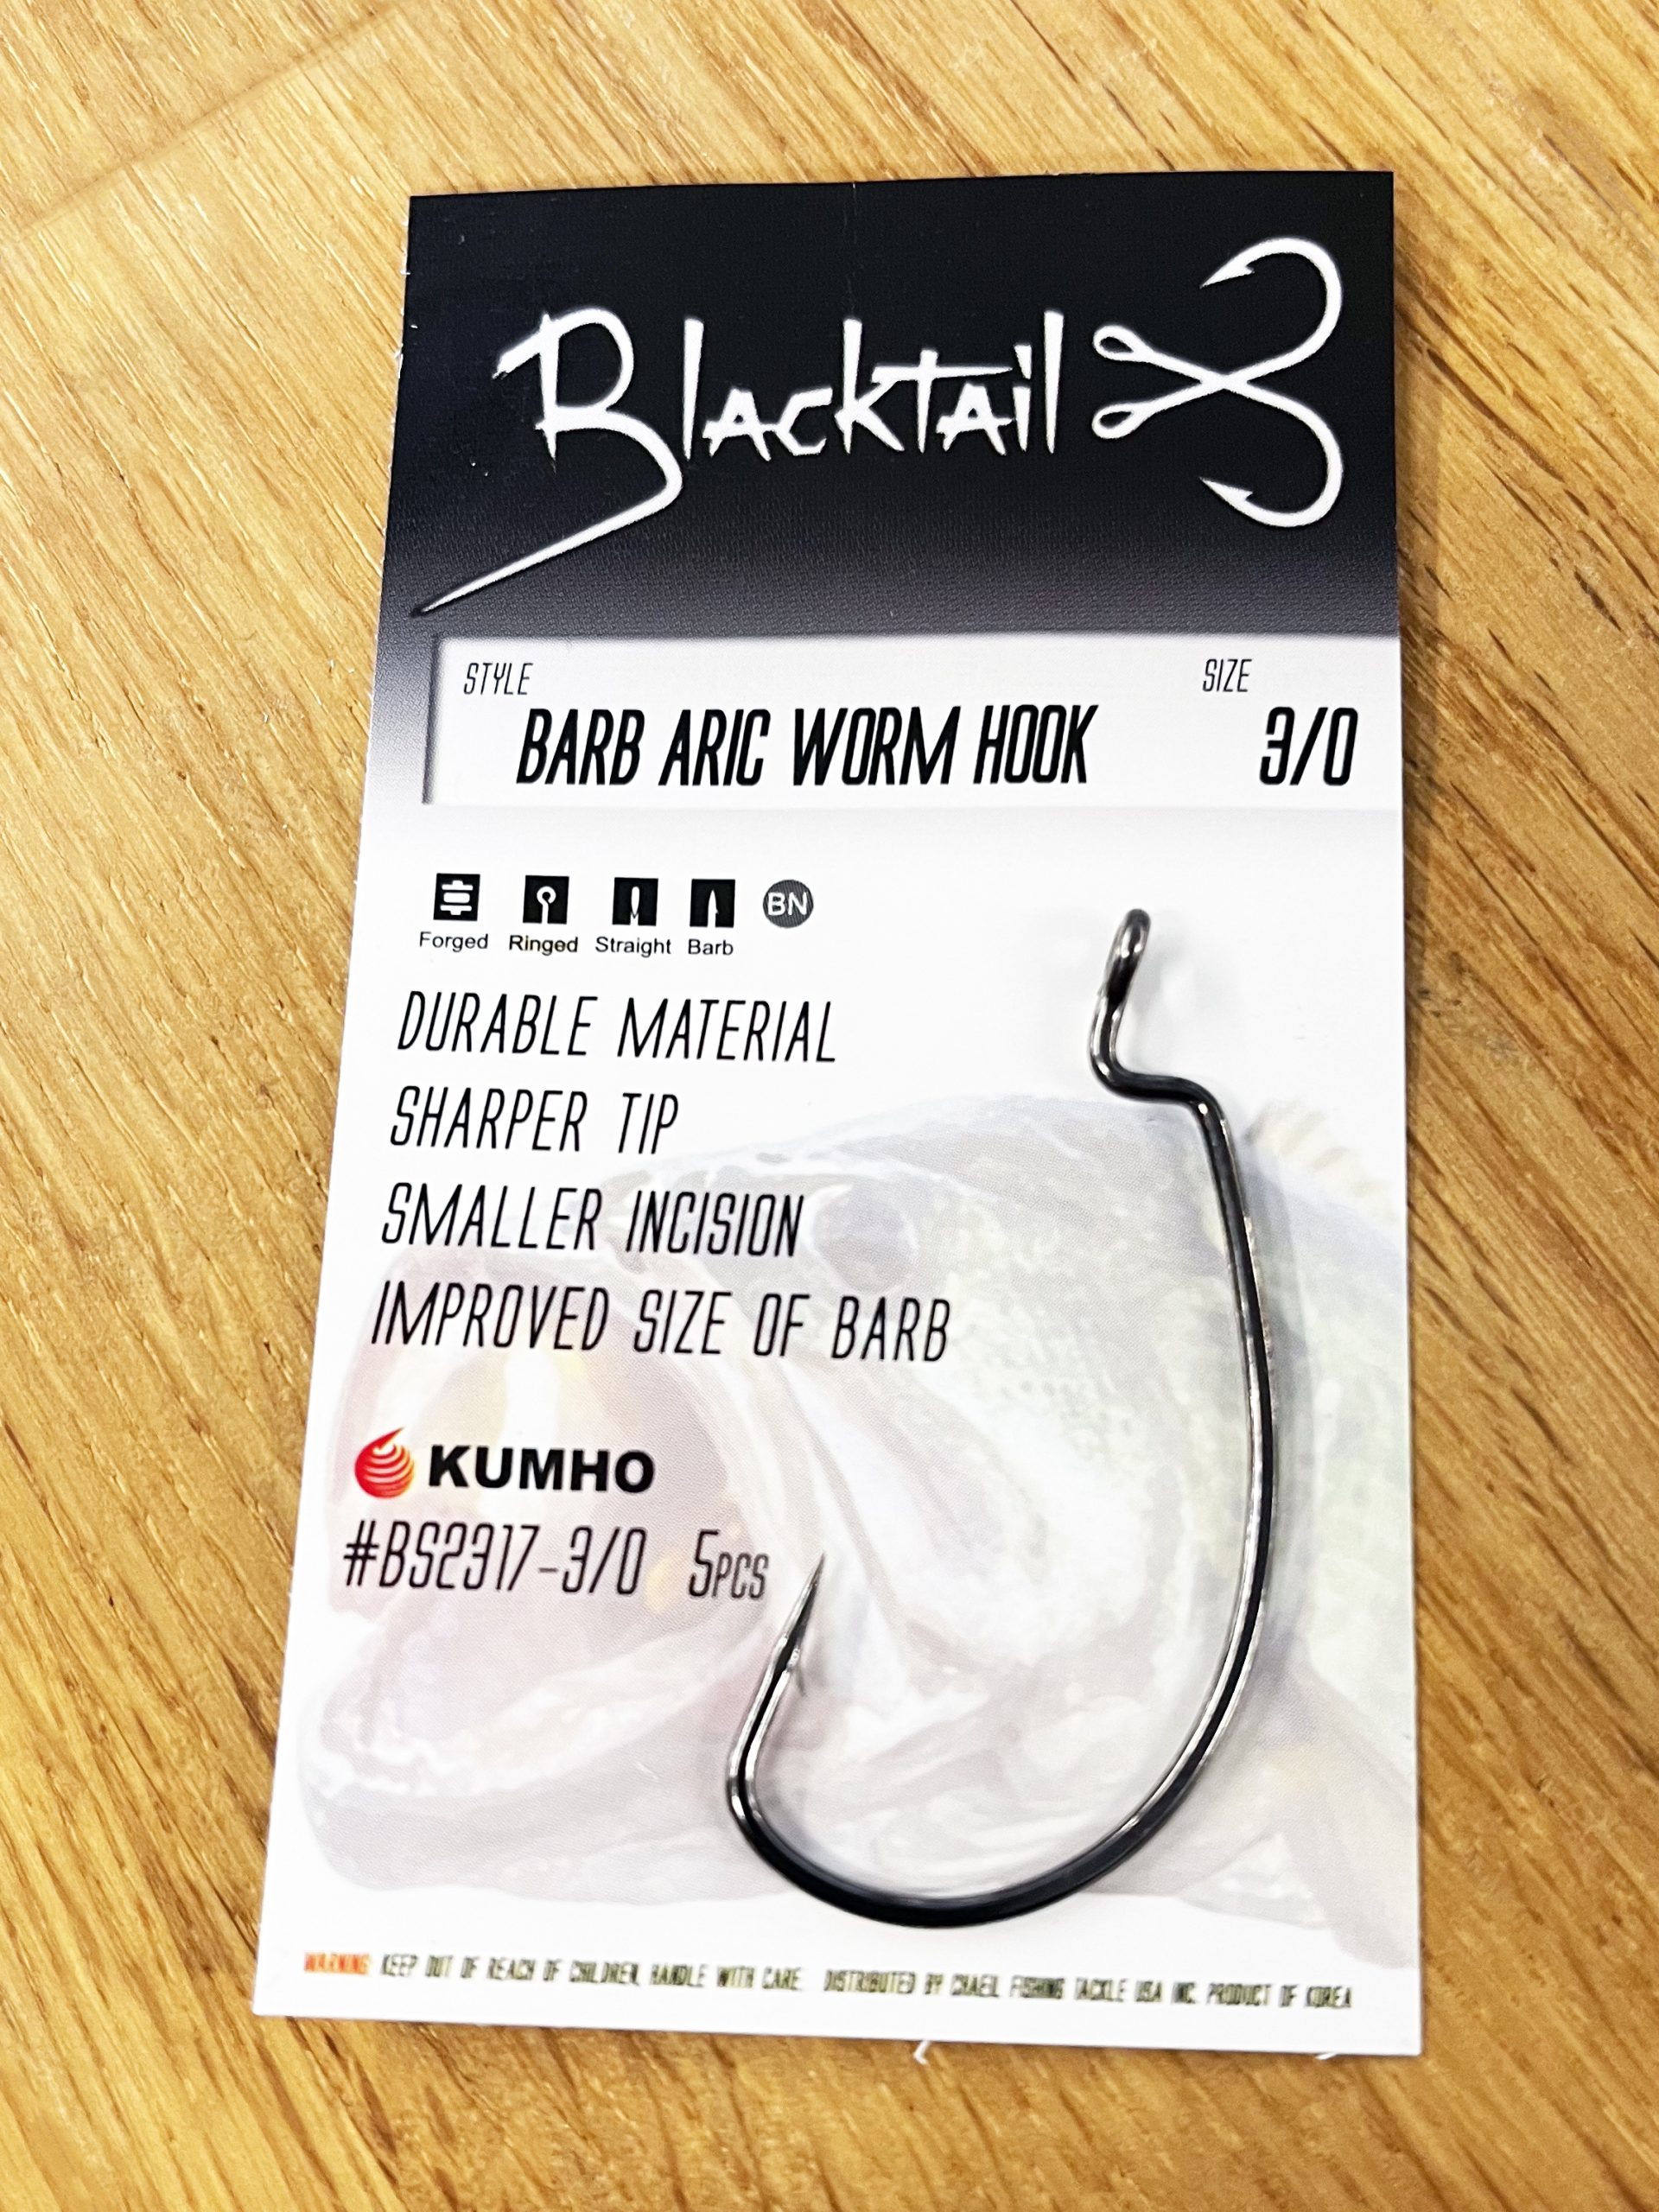 Barb Aric Worm Hook - Strong EWG(Extra Wide Gap) Hook